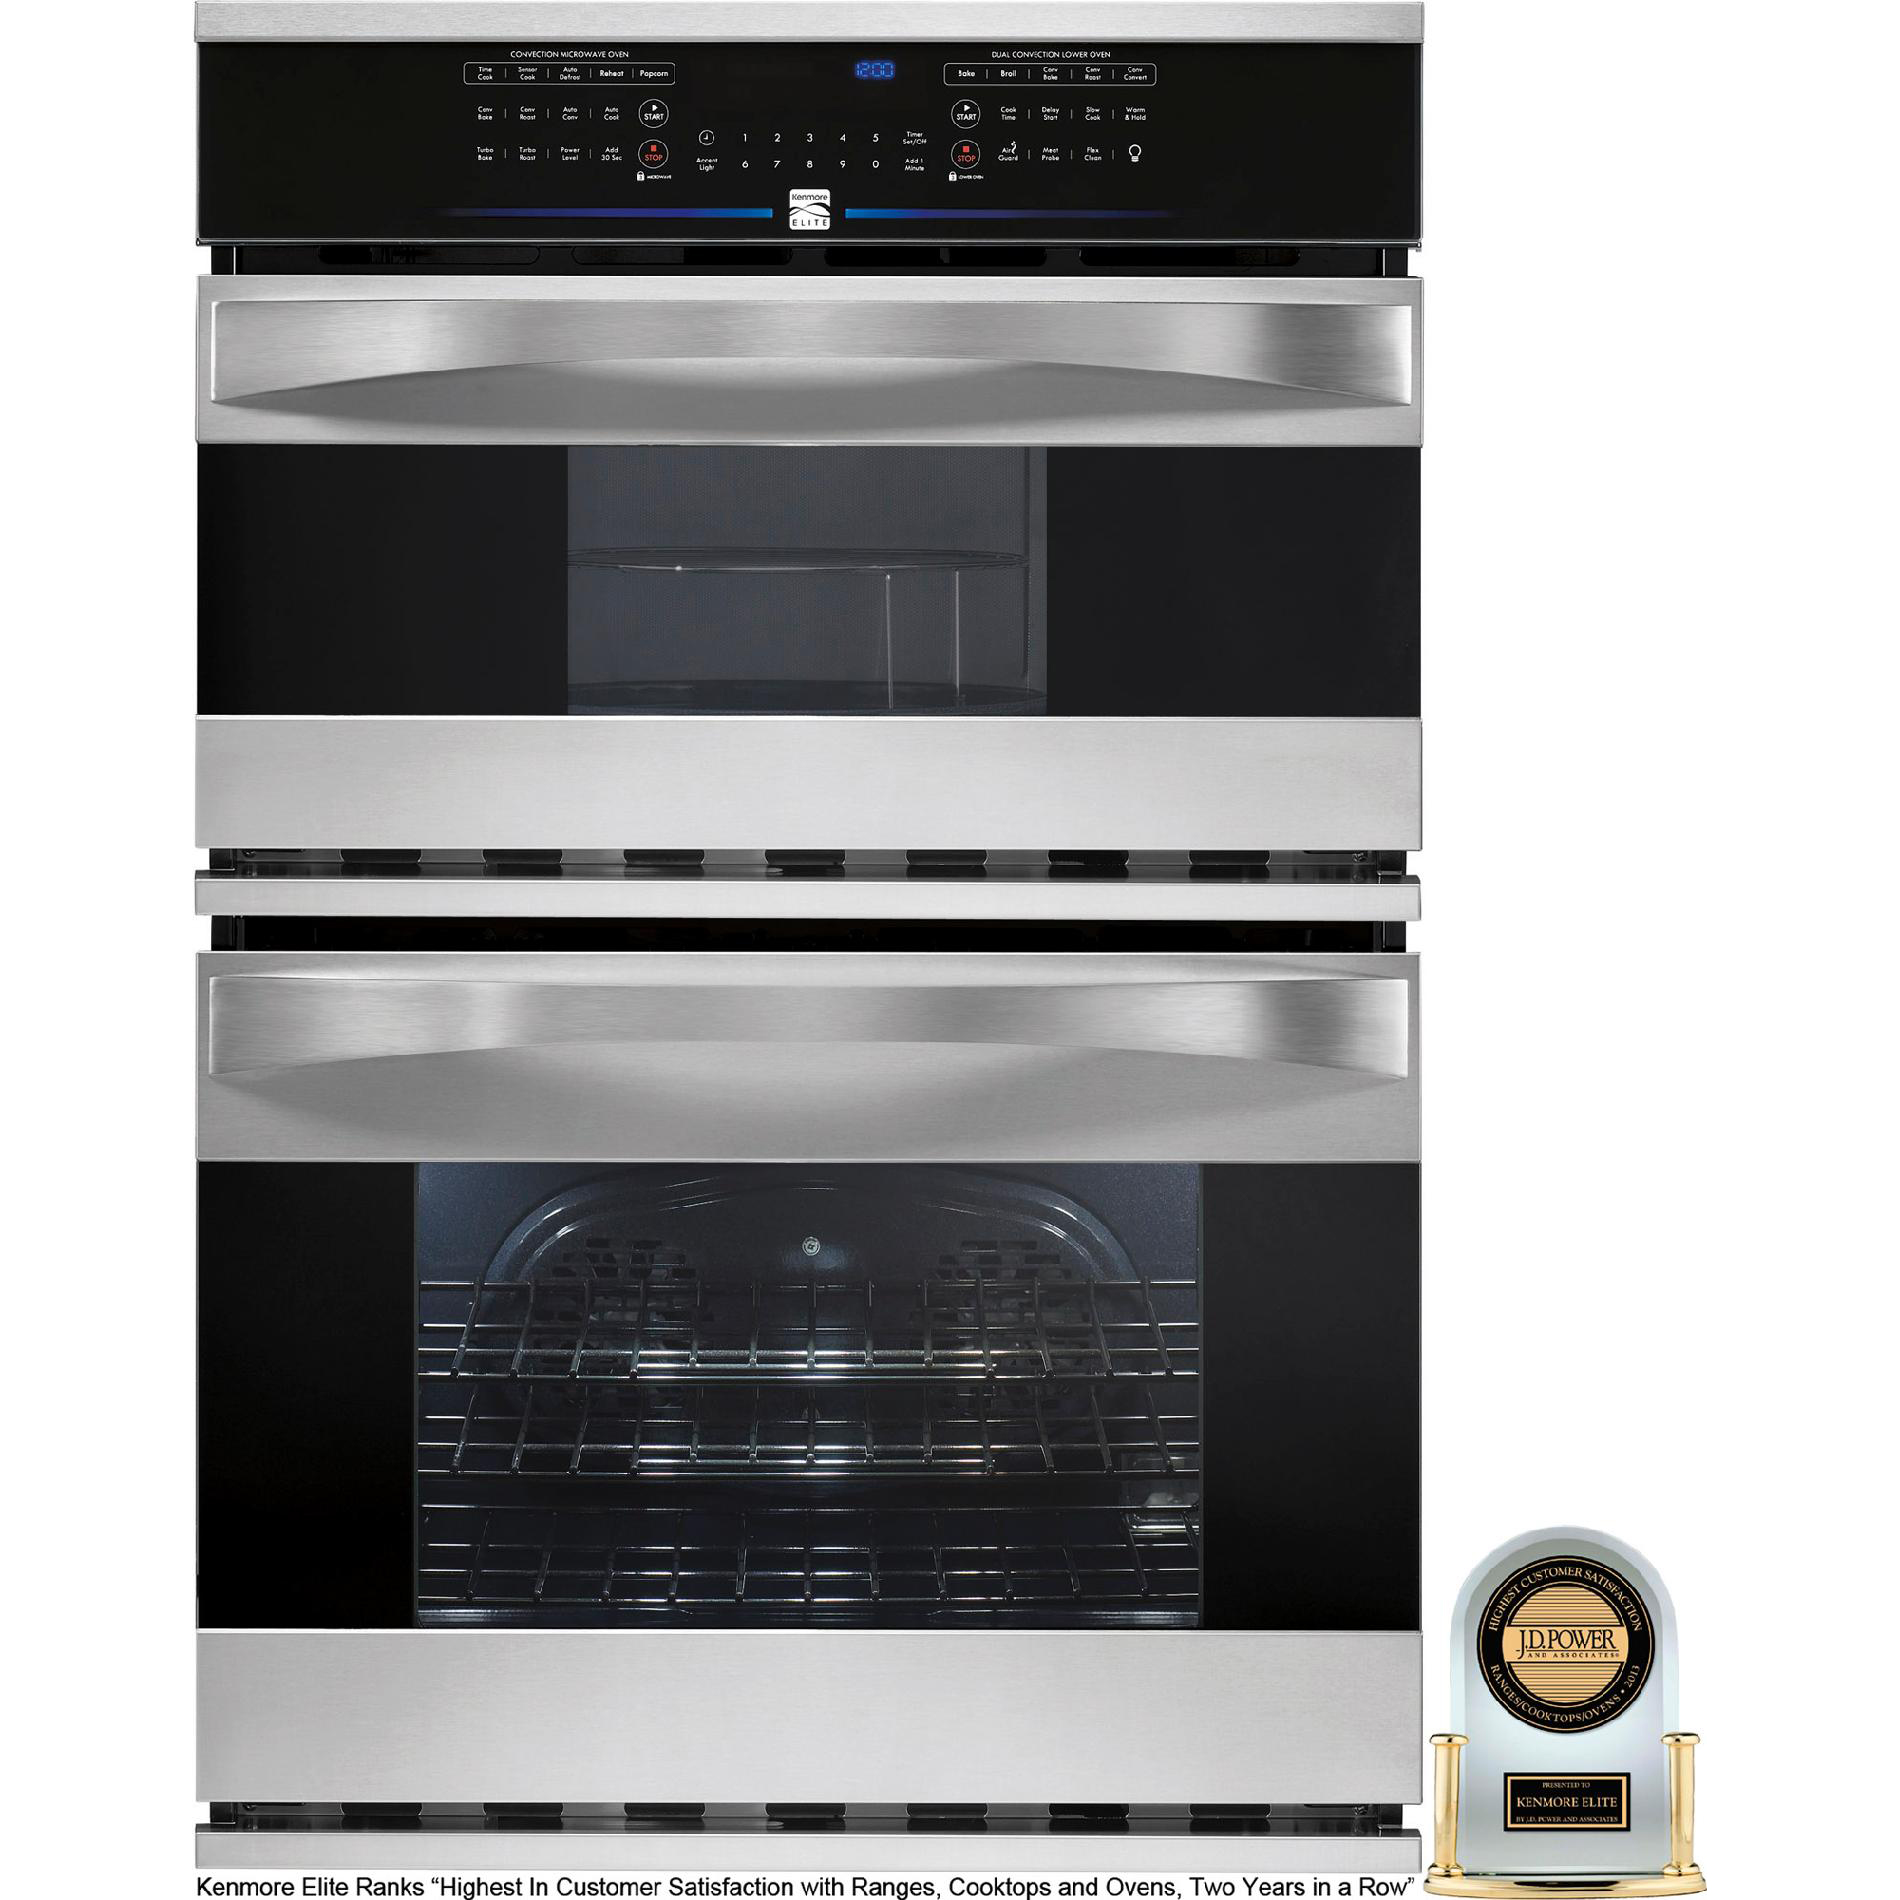 How to remove an error code from a Kenmore oven?